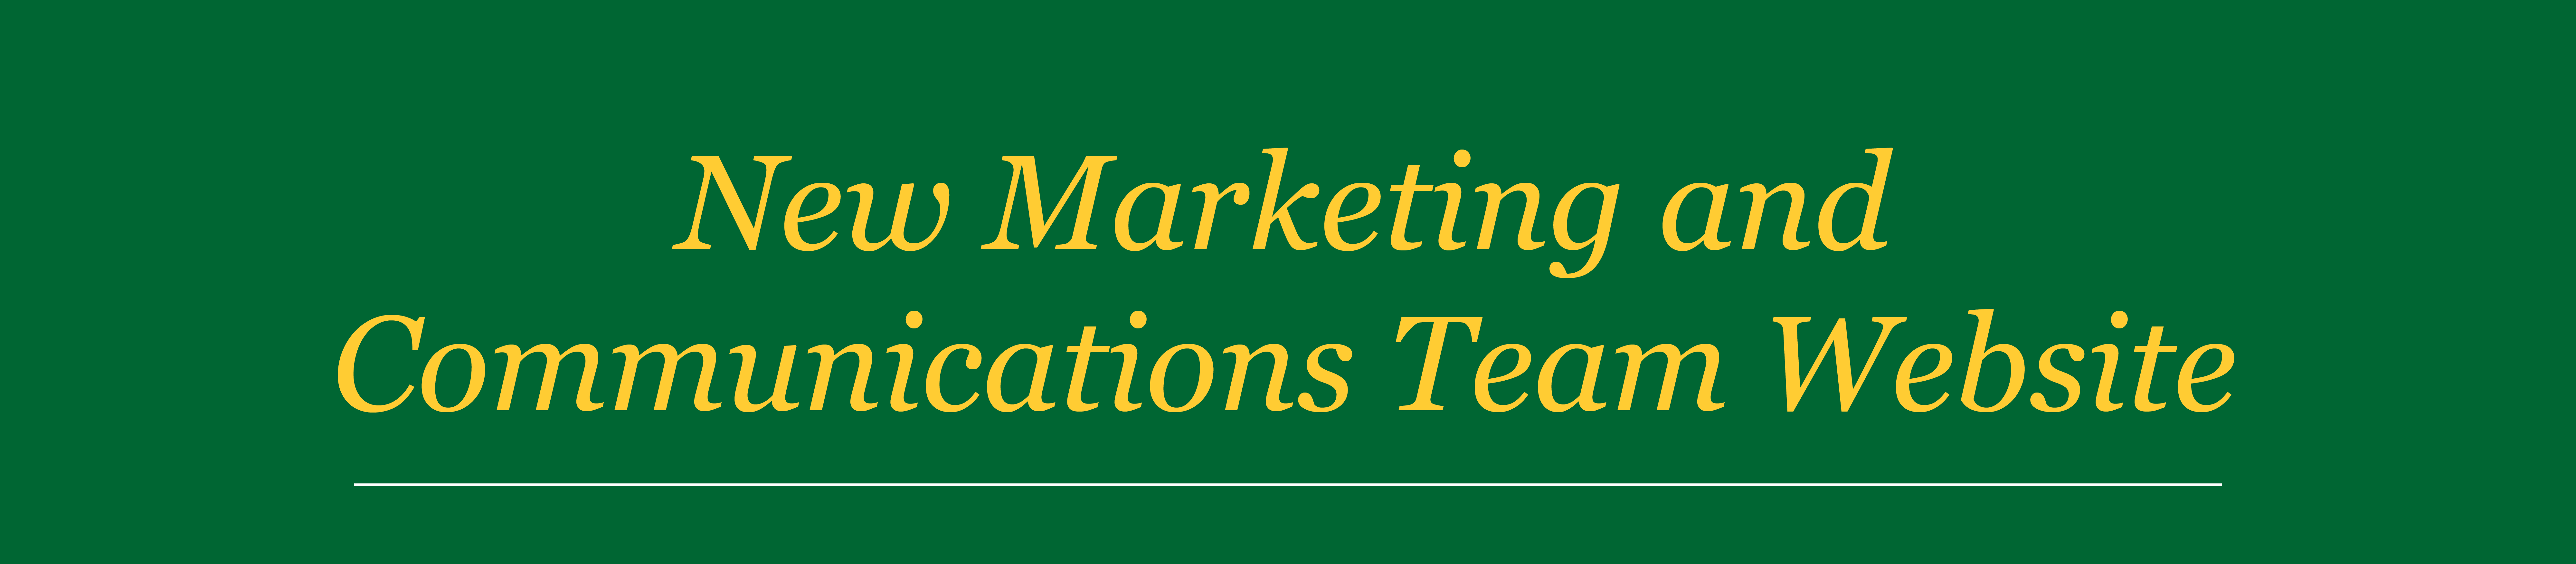 Marketing and Communications Team Website